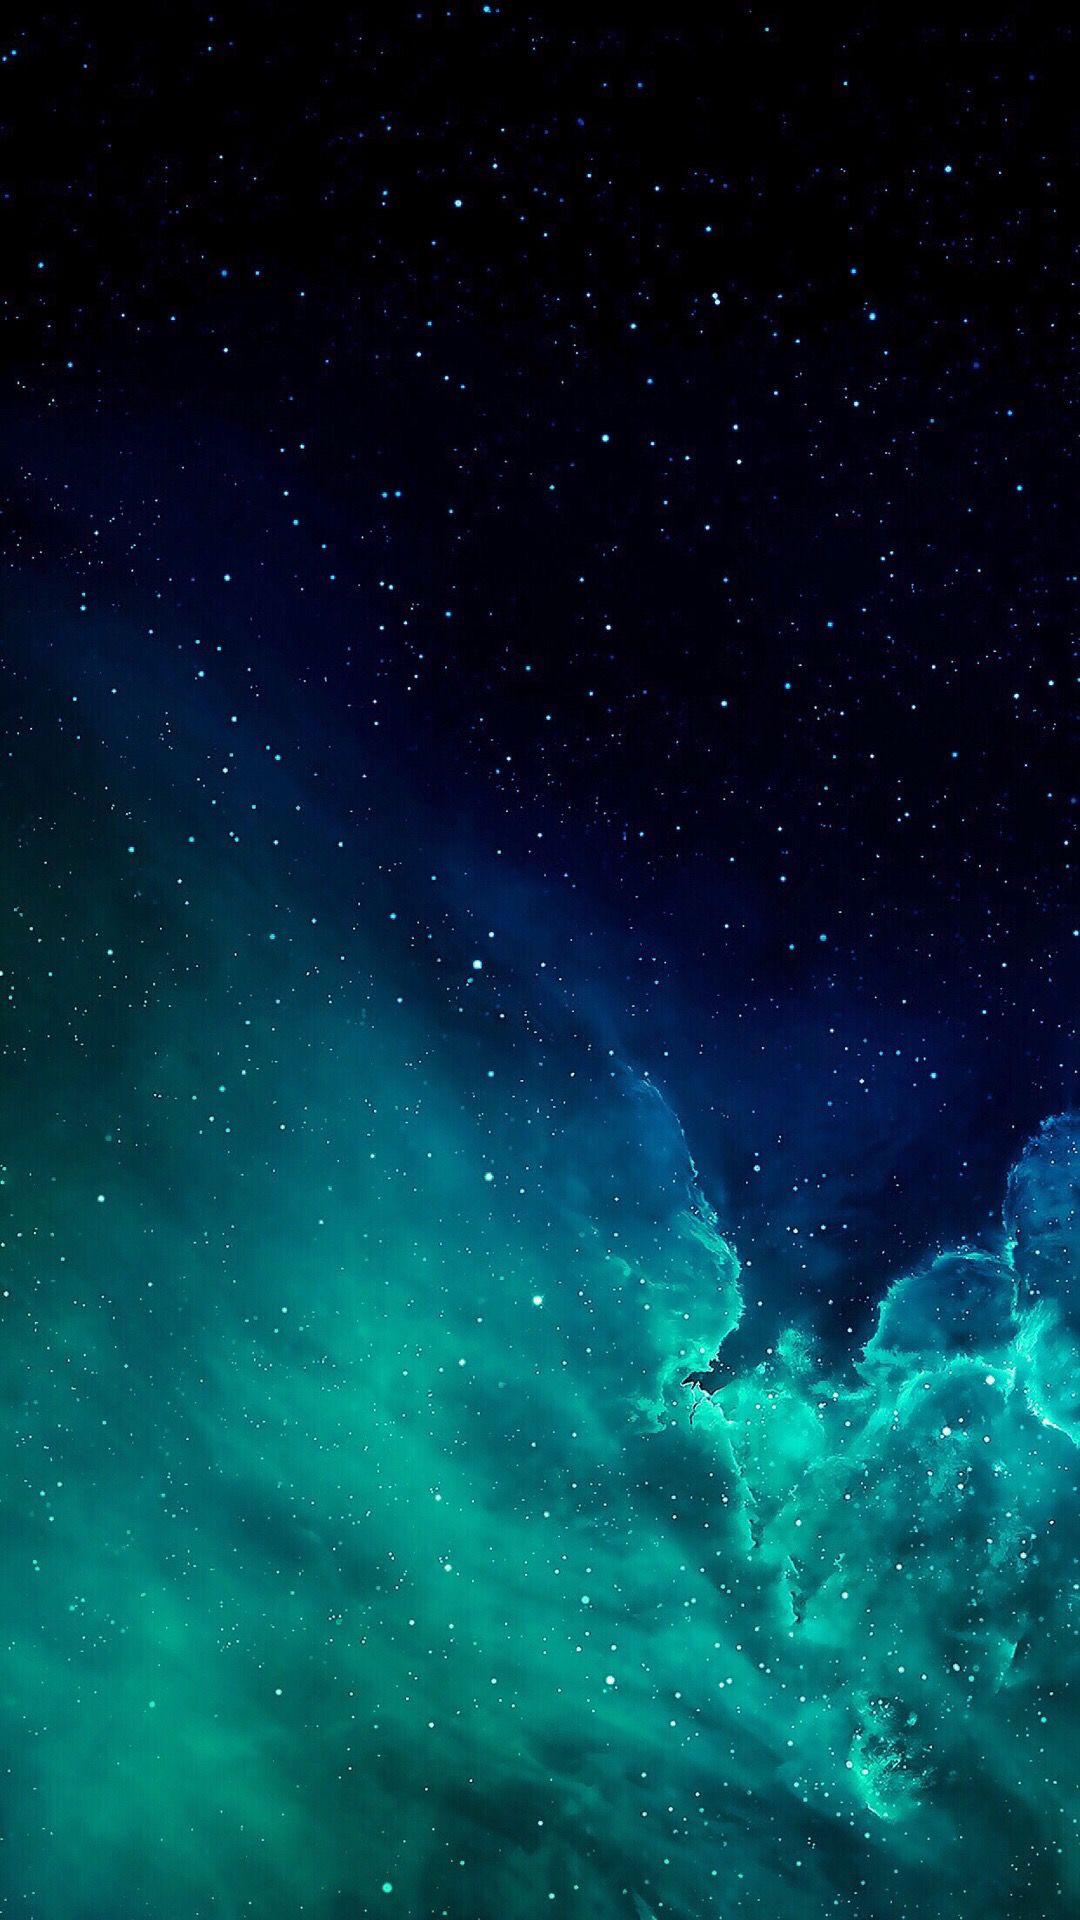 iOS 7 default wallpaper looks great on the new iPhones